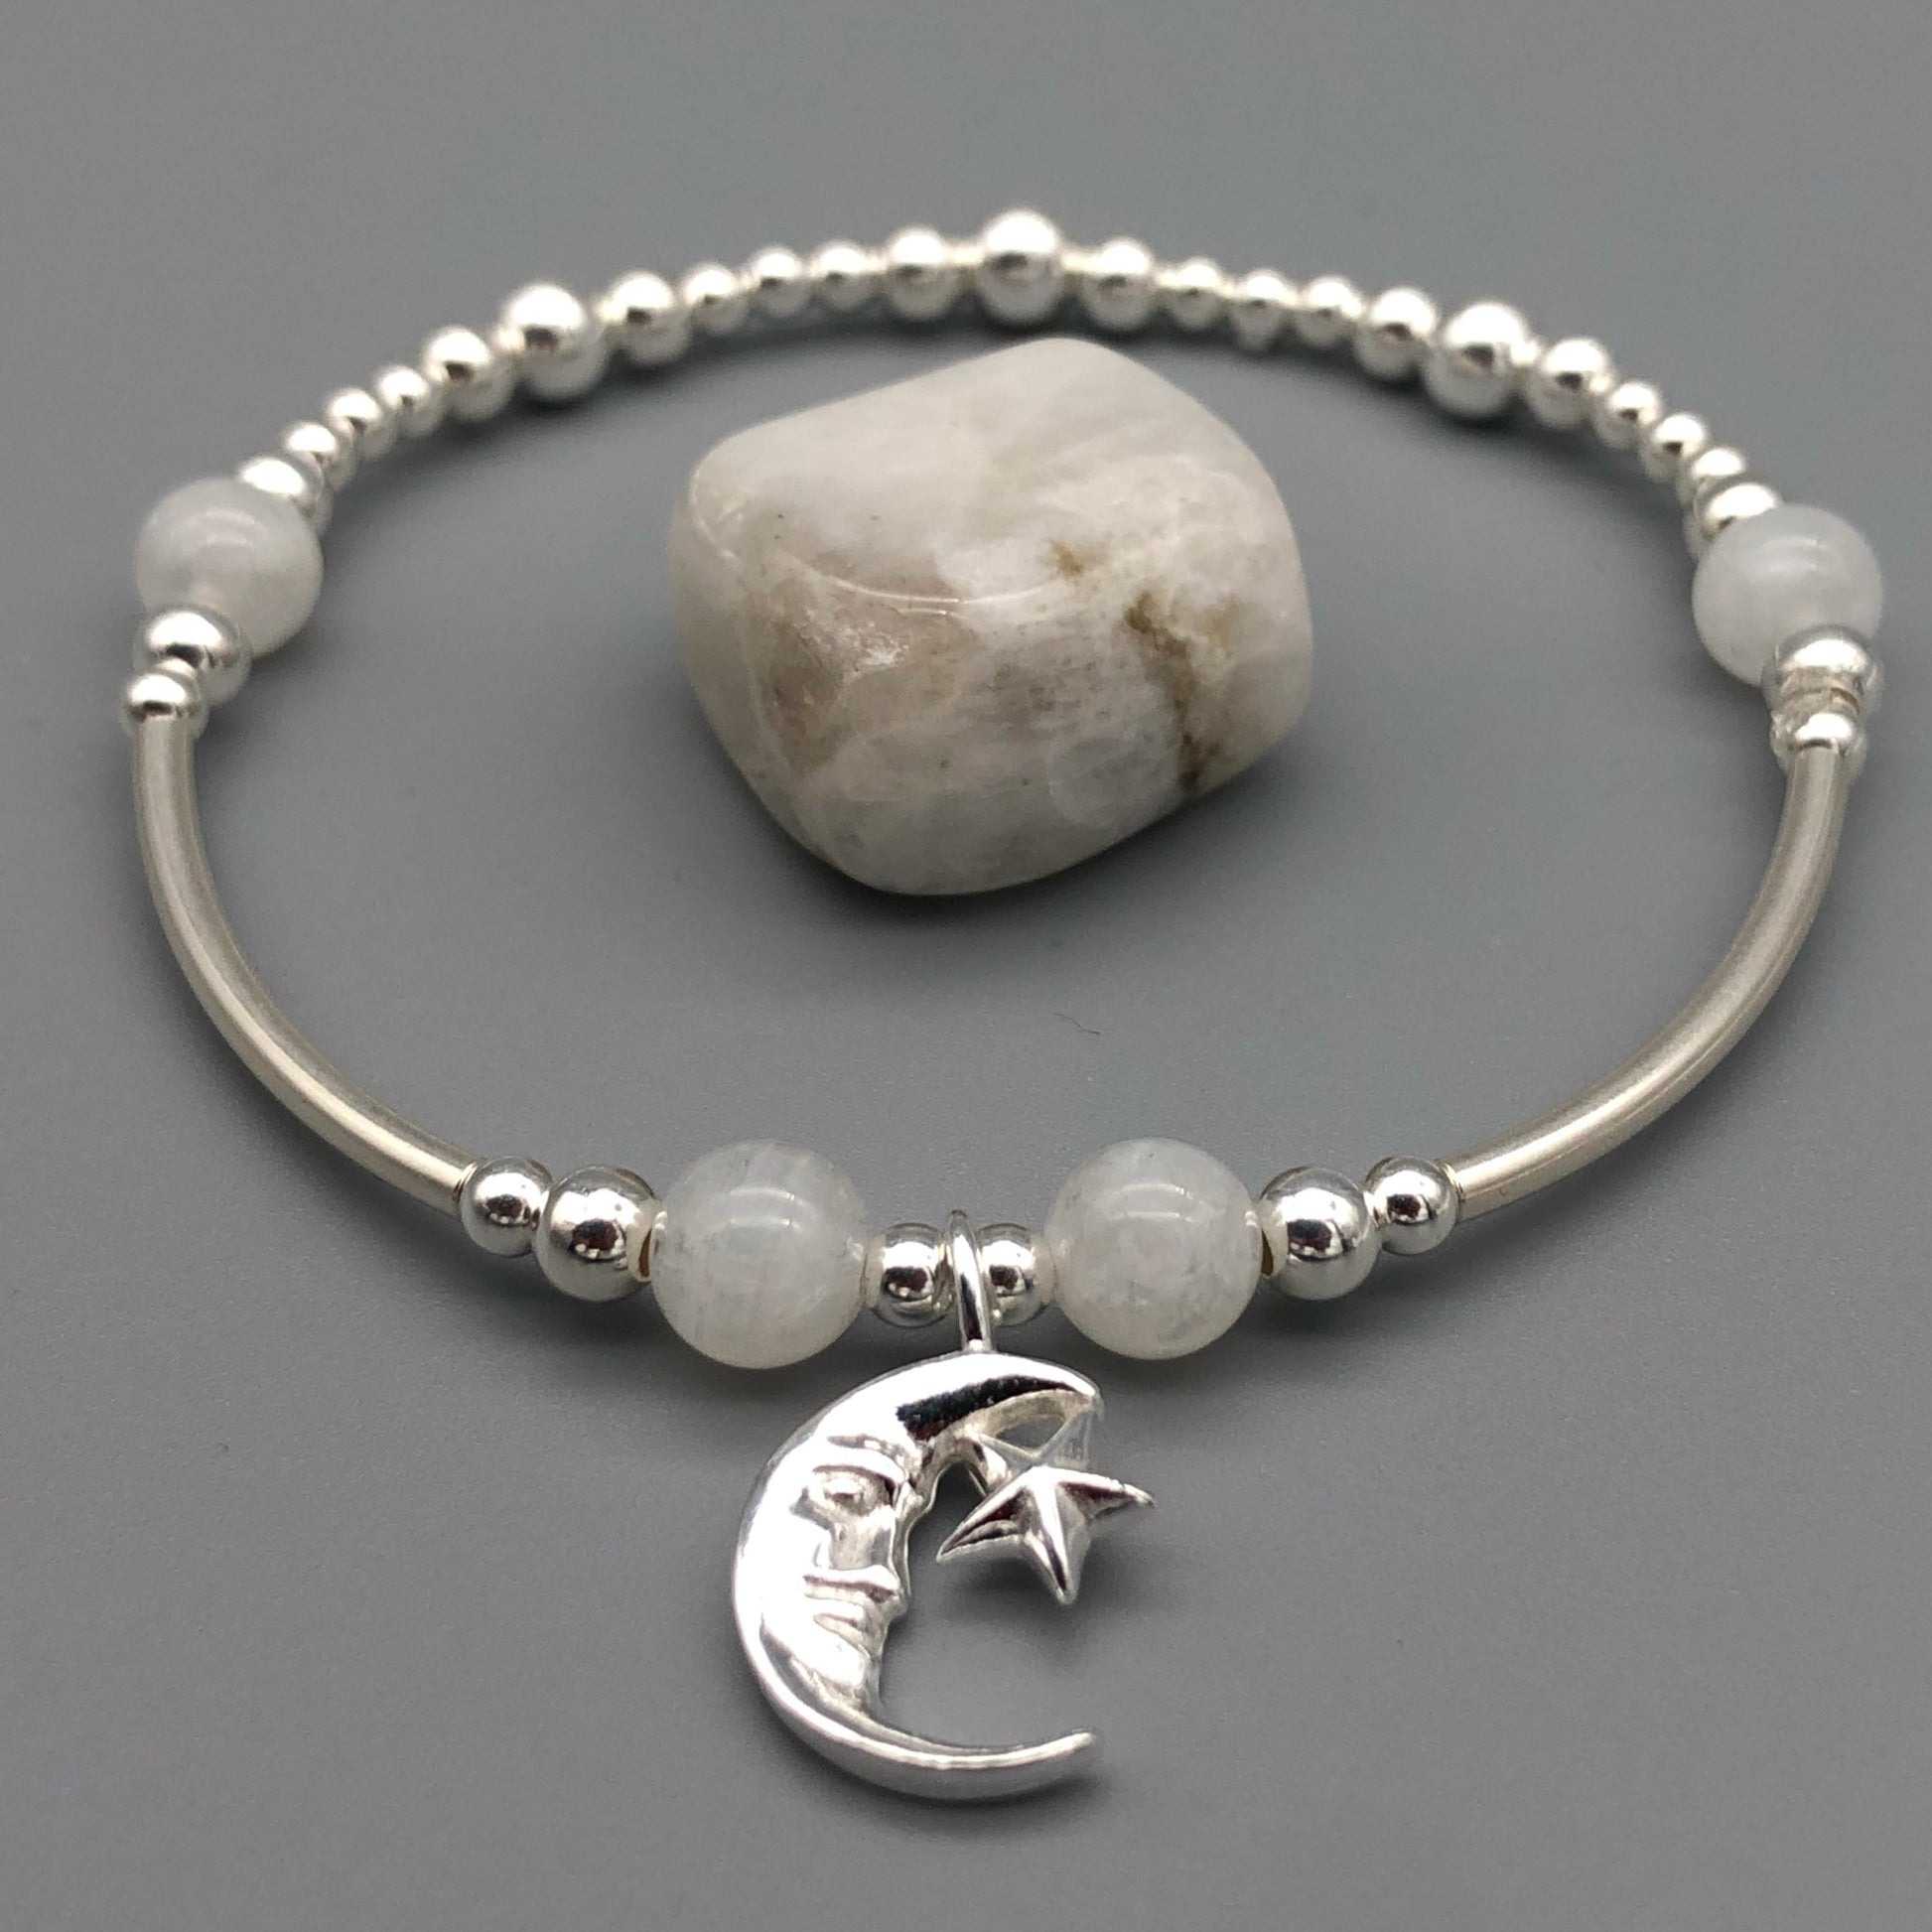 Moon & star charm & moonstone women's sterling silver stacking bracelet by My Silver Wish